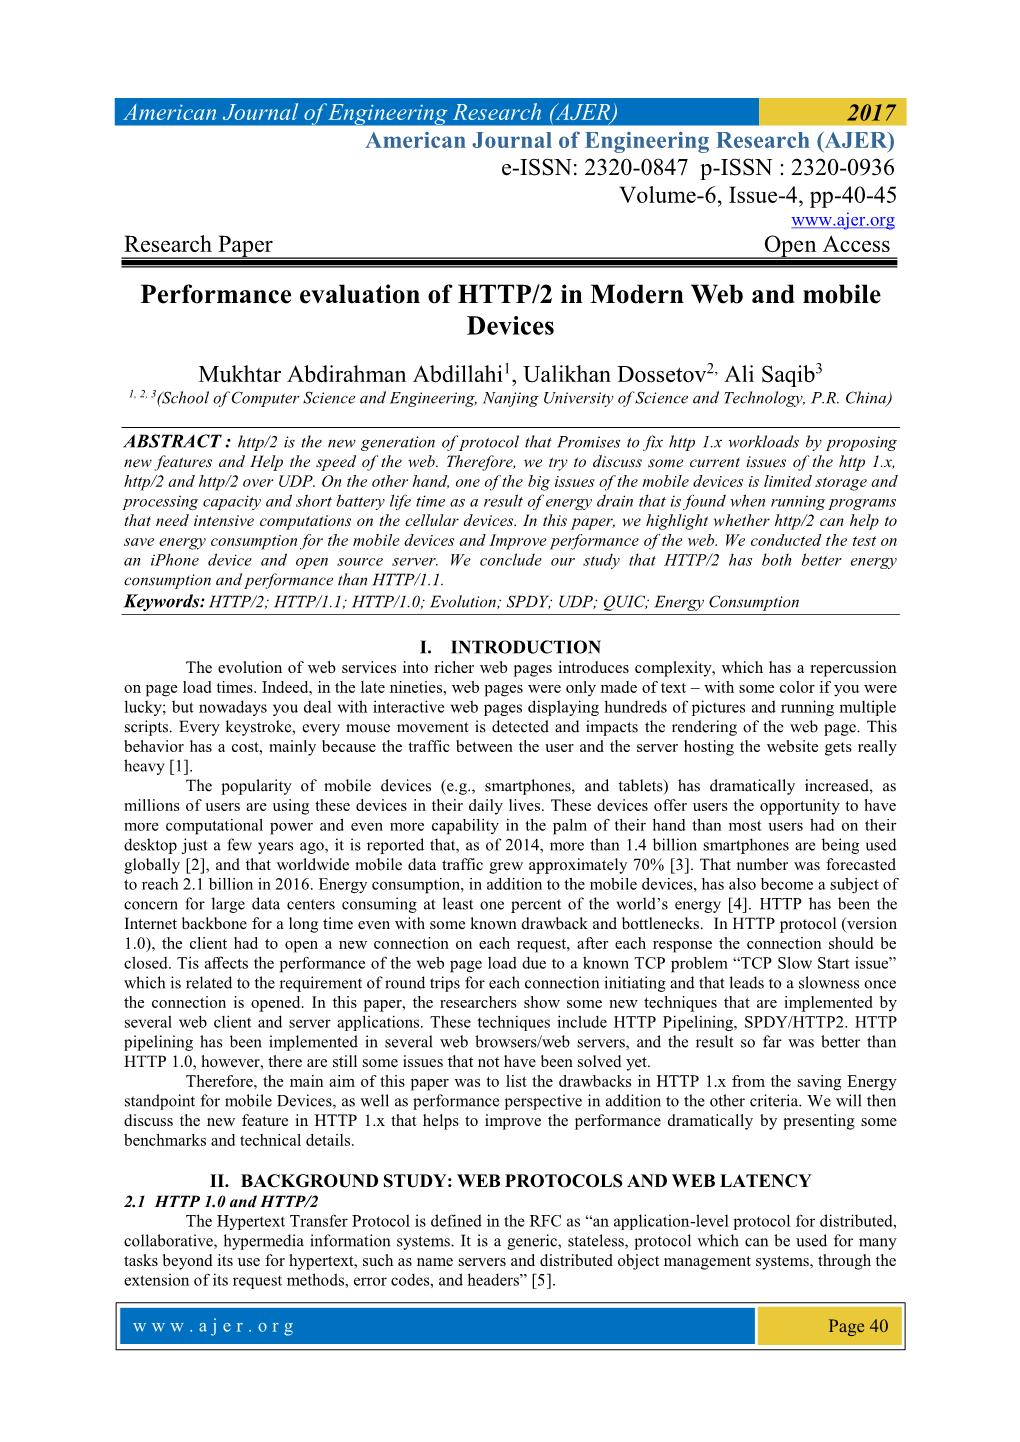 Performance Evaluation of HTTP/2 in Modern Web and Mobile Devices